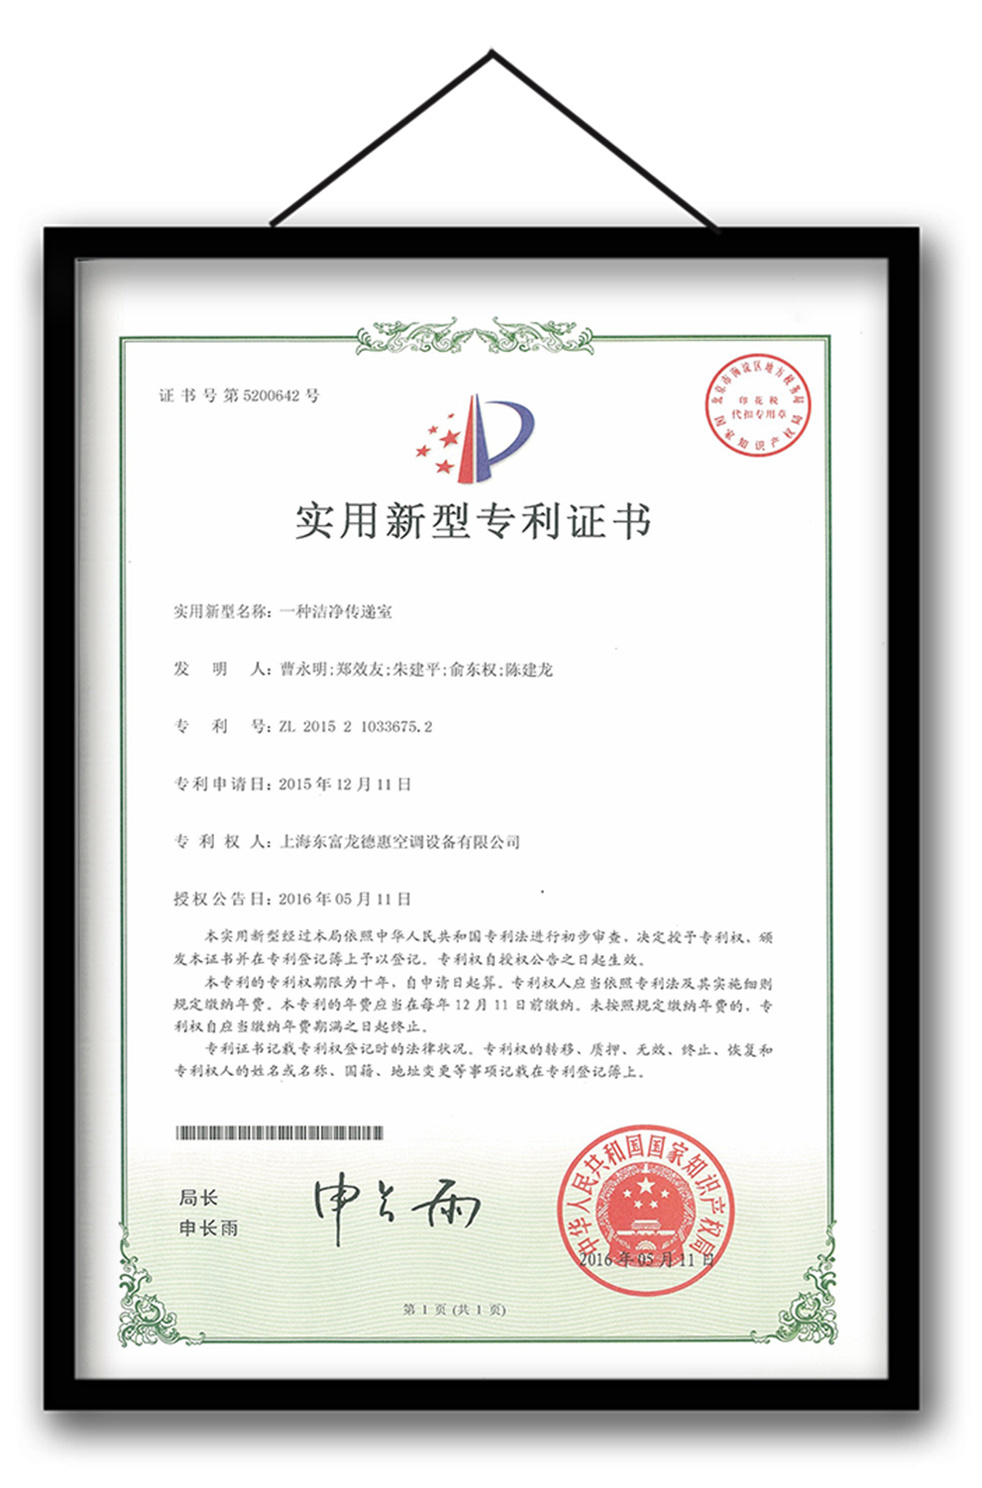 Patent certificate for a clean transfer window